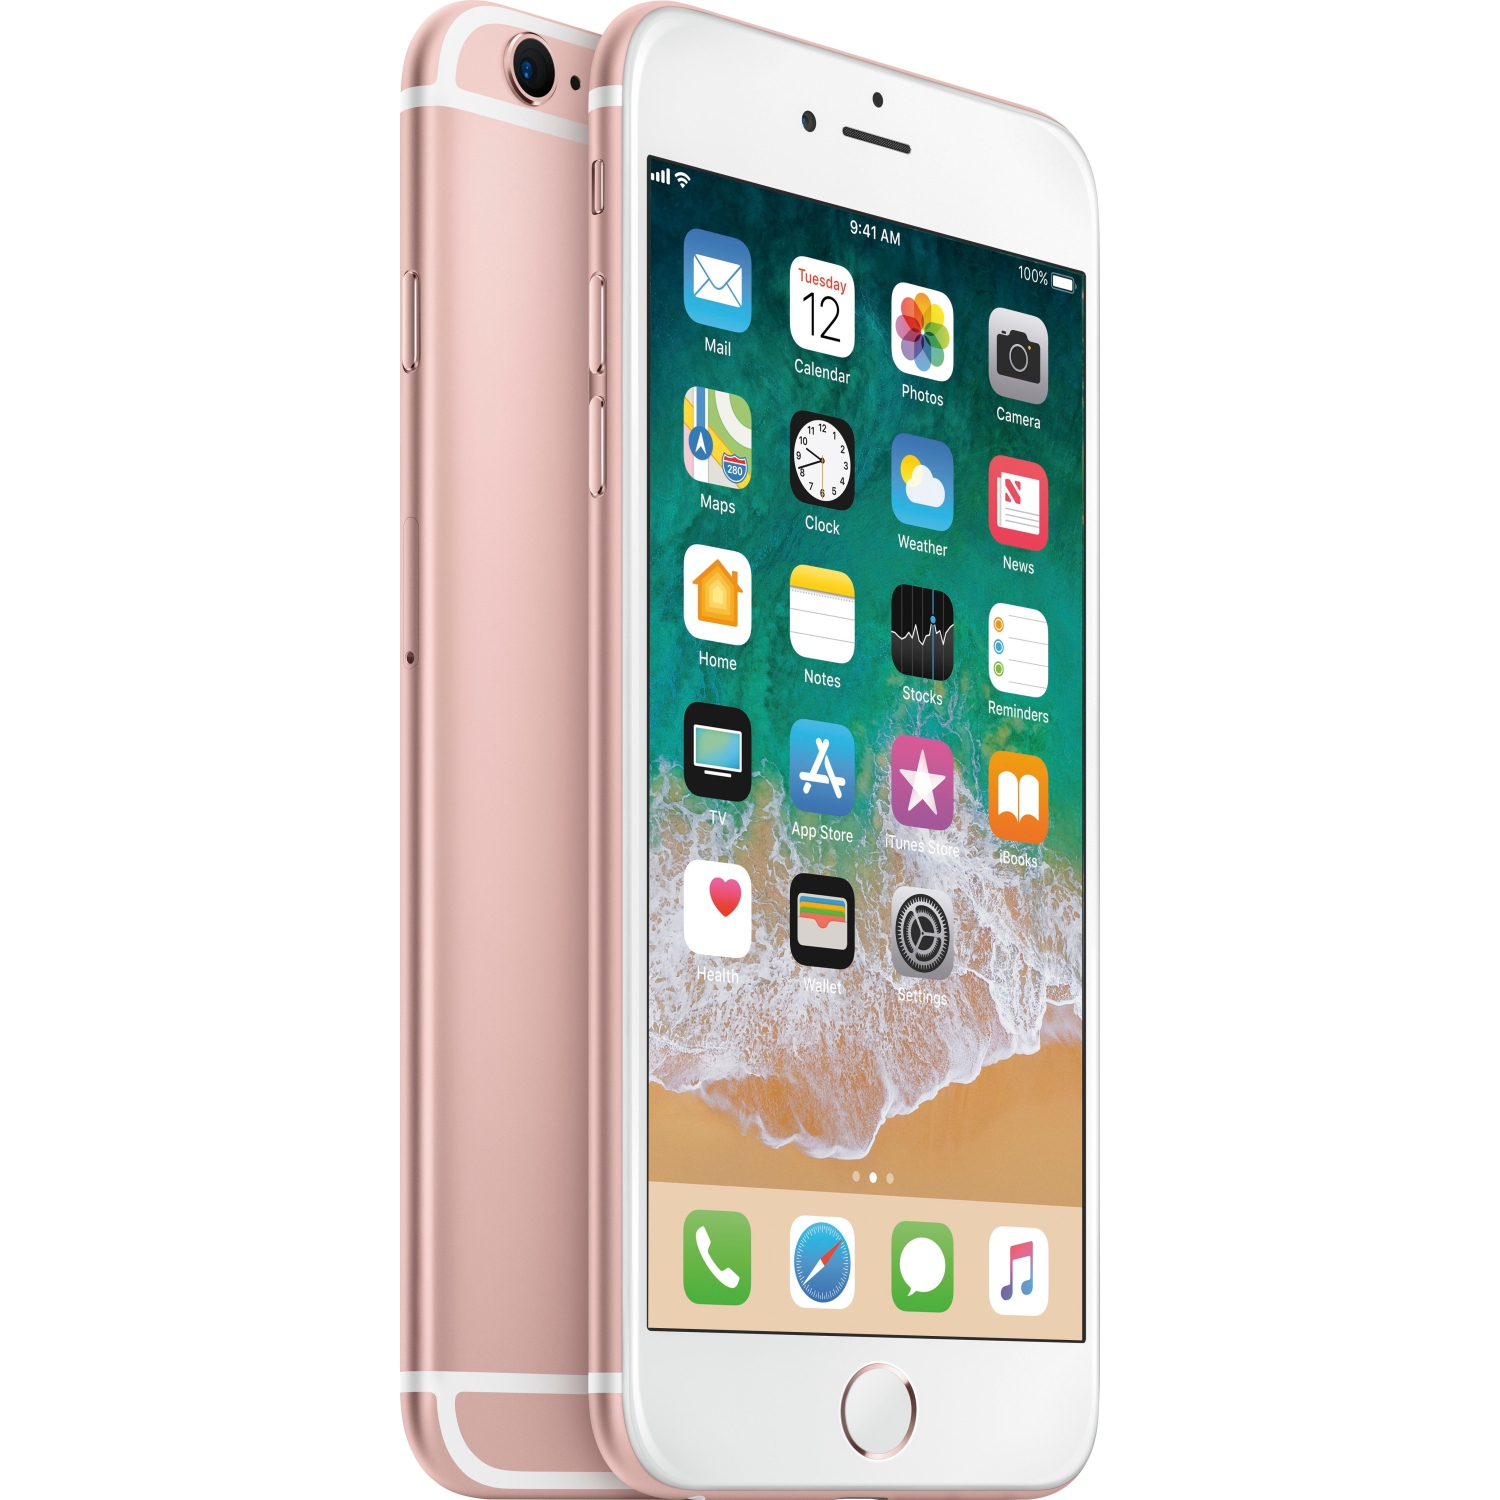 Apple iPhone 6s Plus 128GB Smartphone - Rose Gold - Unlocked - Manufacturer Certified Pre-Owned